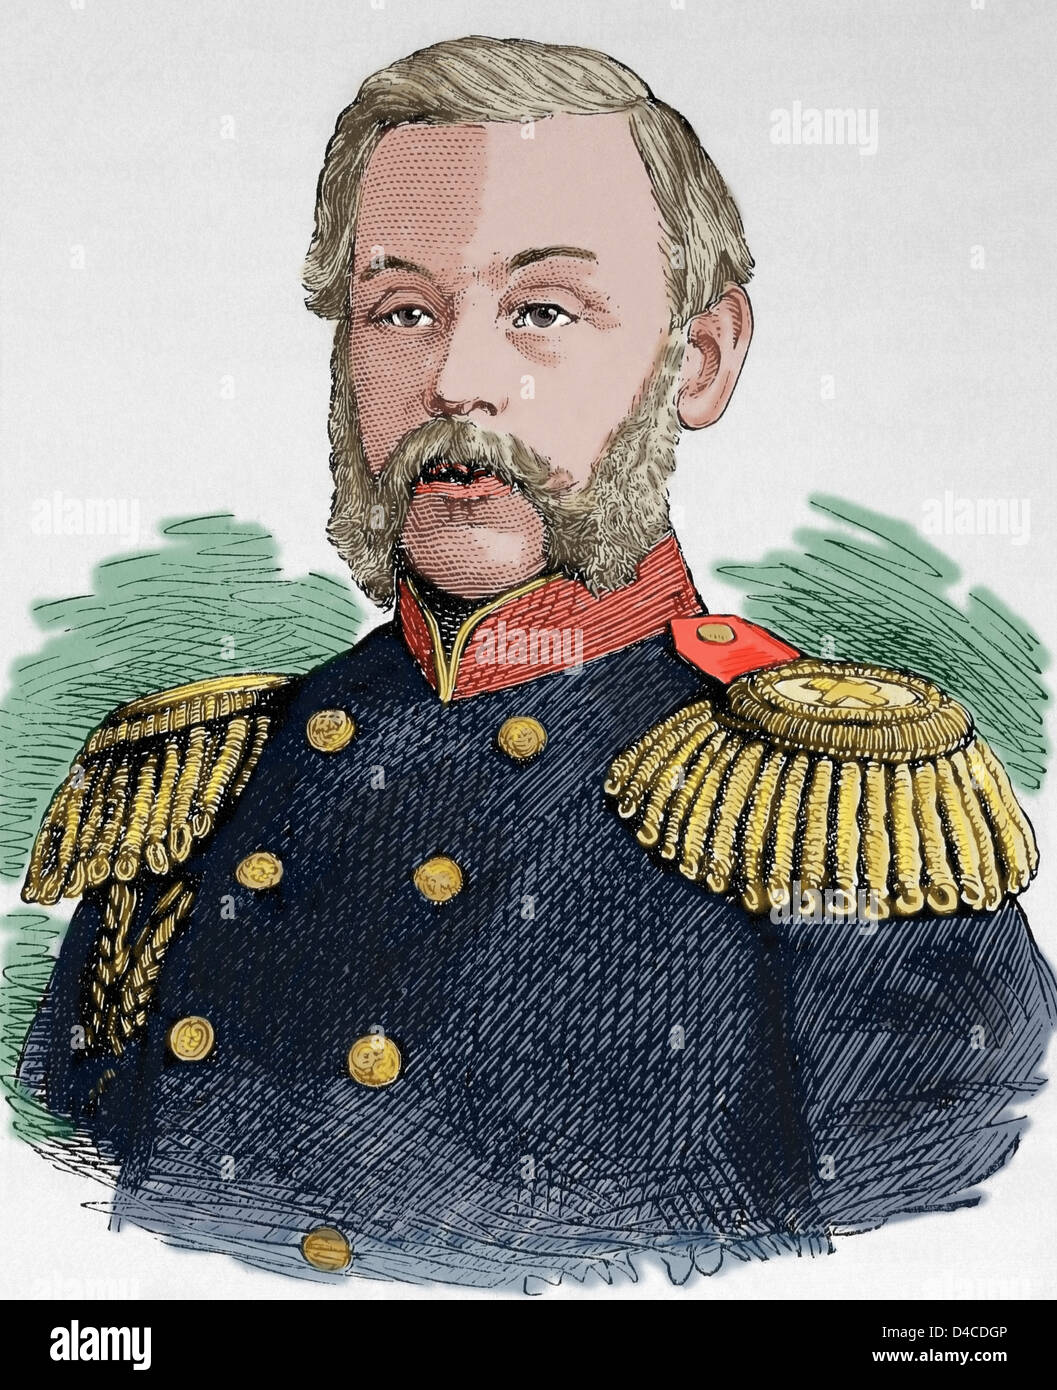 Dmitry Milyutin (1816-1912). Russian Field Marshal and Minister of War. Engraving in Spanish and American Illustration, 1877. Stock Photo